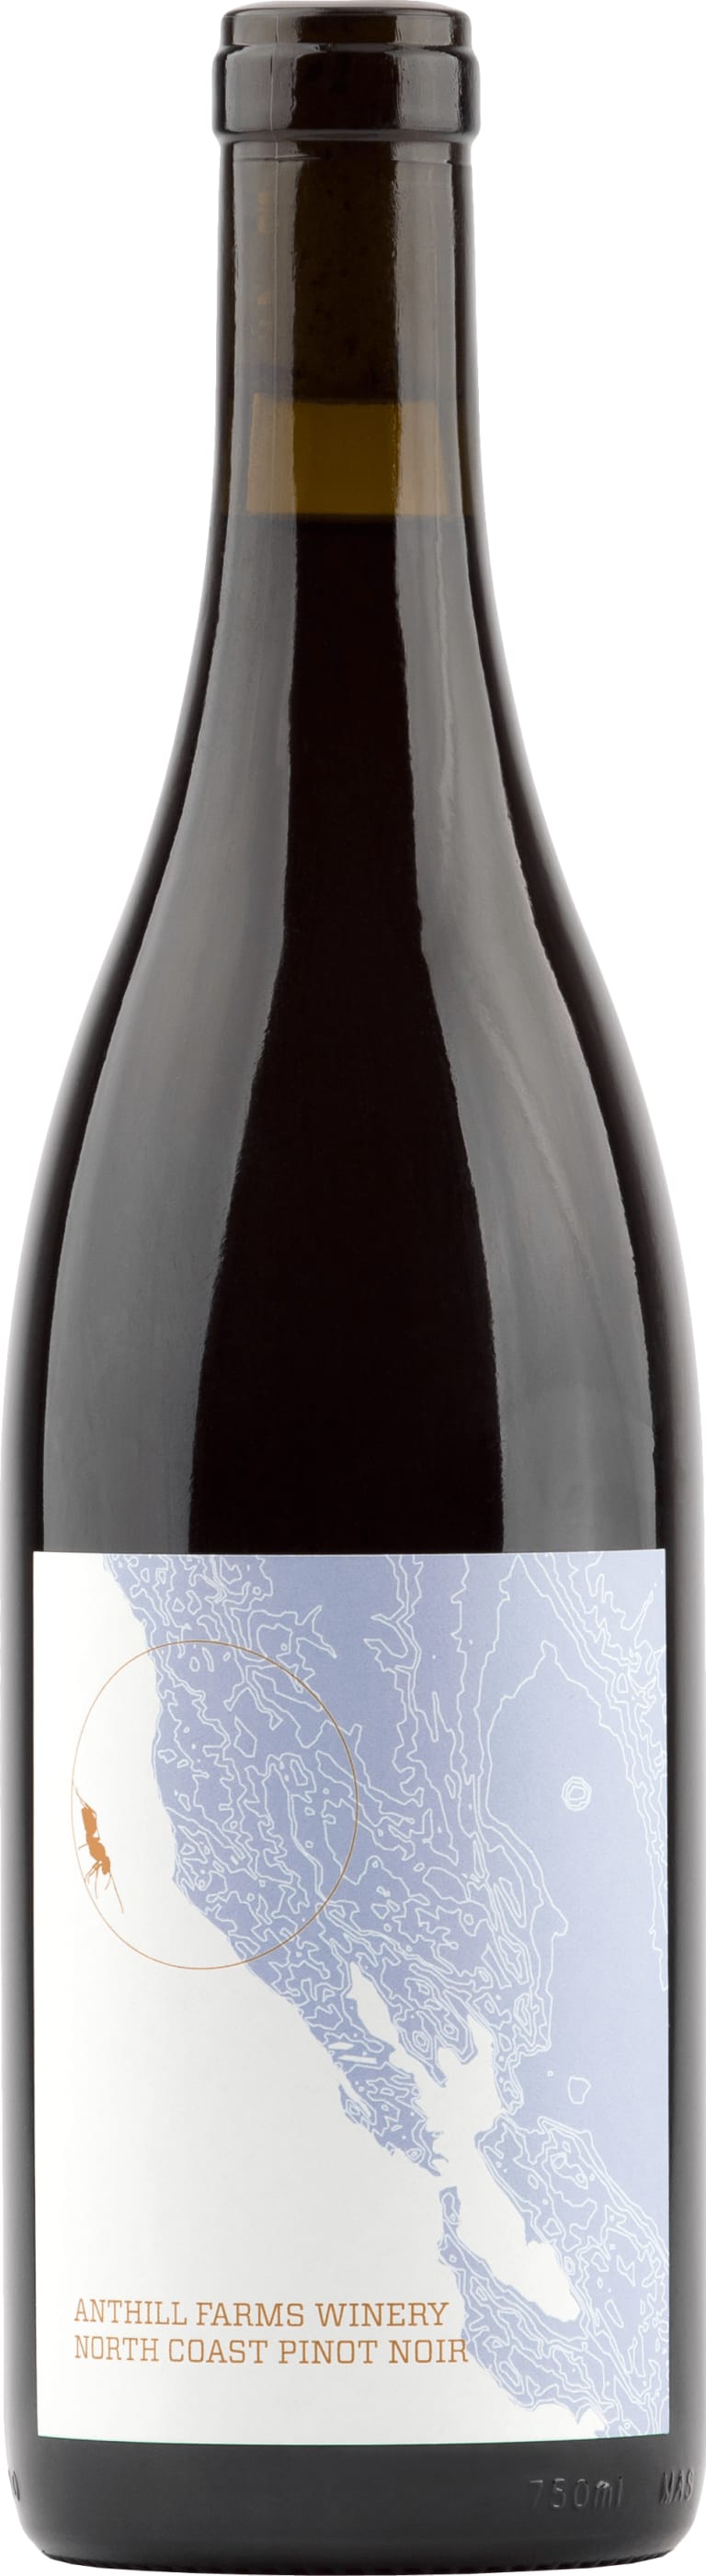 Pinot Noir 'North Coast', Anthill Farms